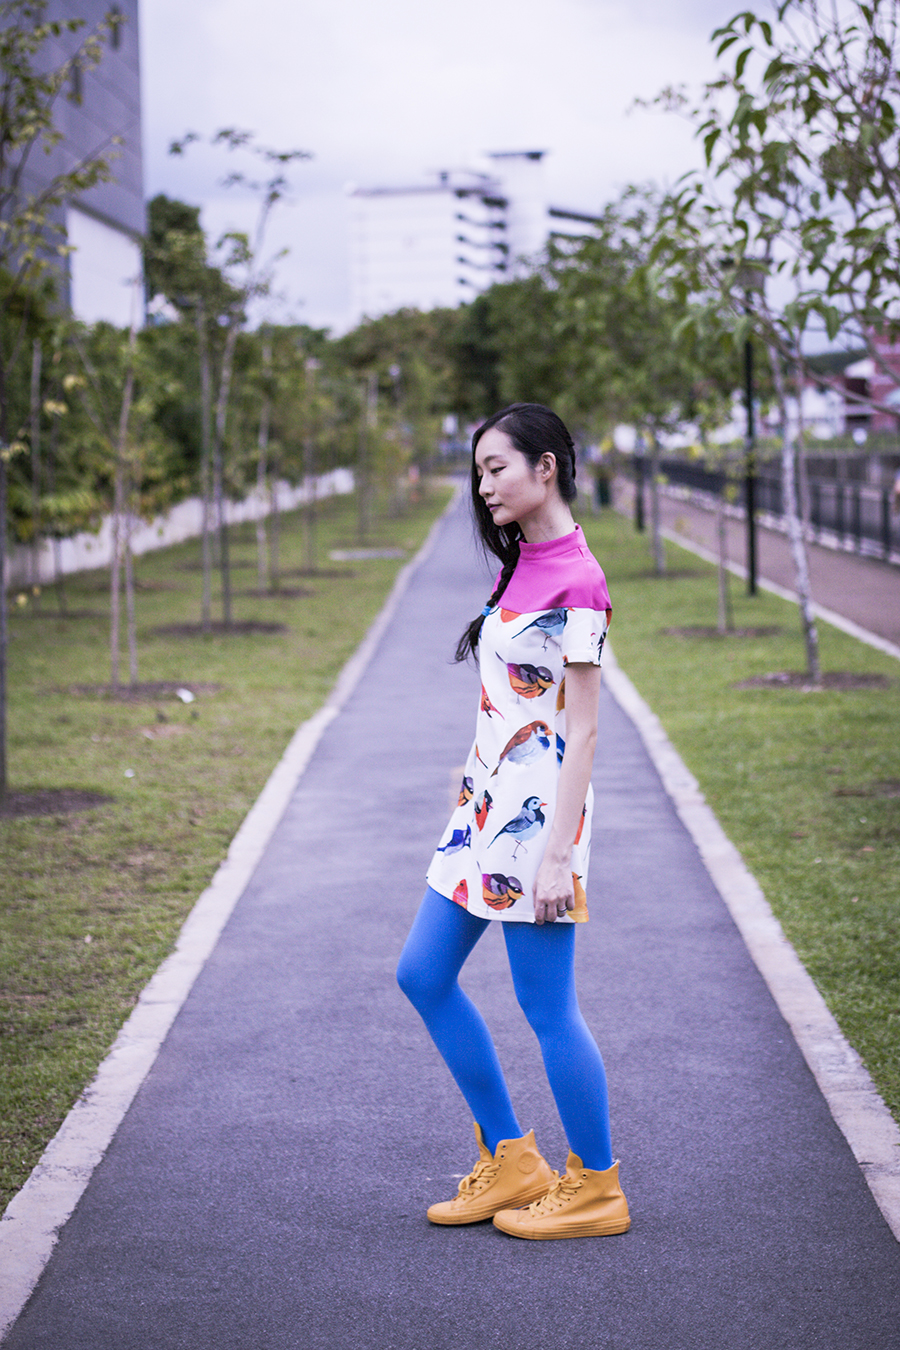 ASOS bird dress, We Love Colors blue tights, Converse yellow rubber chuck taylor sneakers.